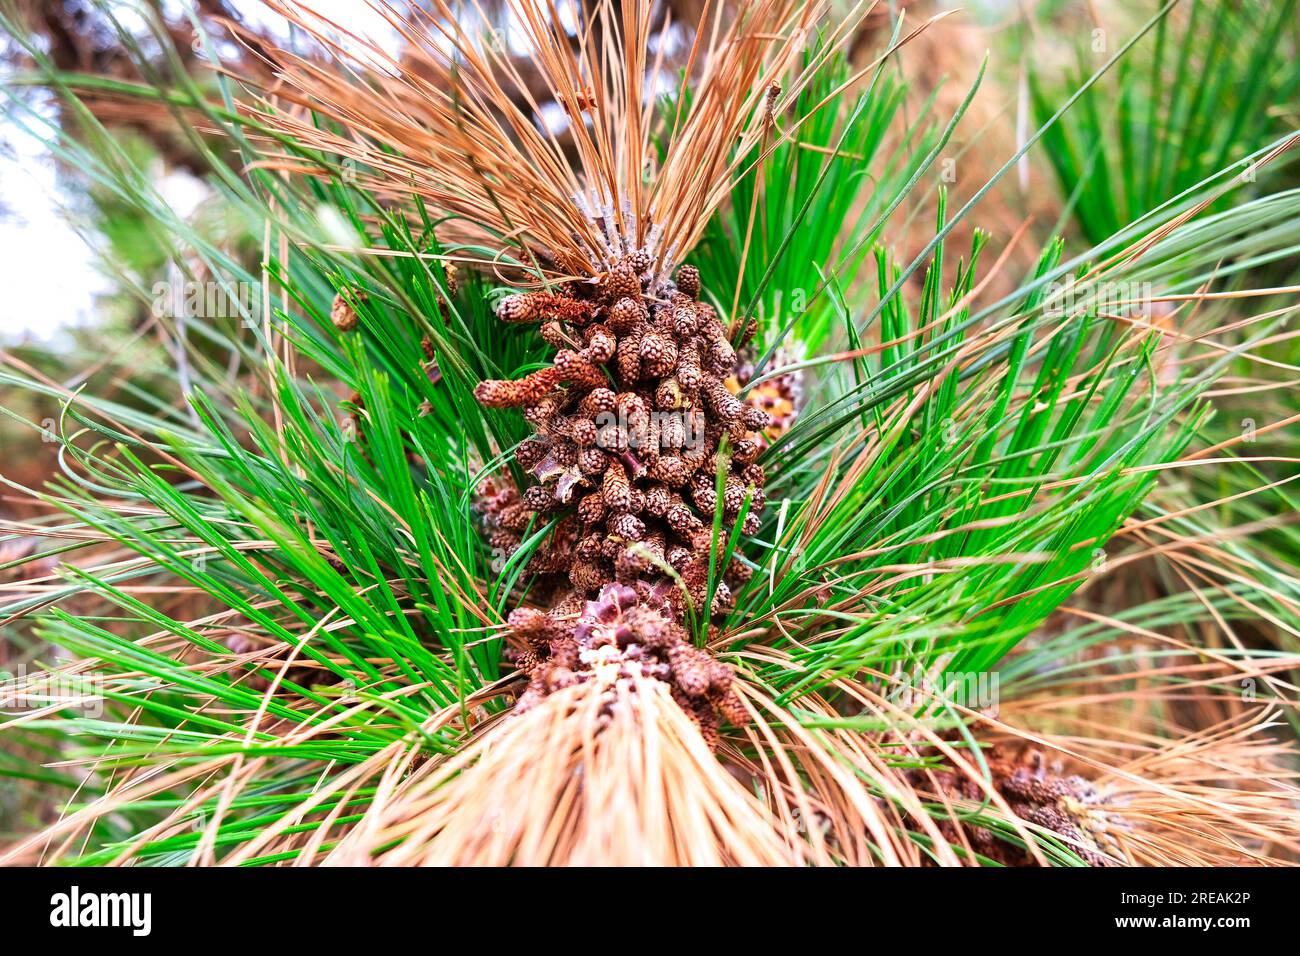 Fully open male cones and needles of a pine tree (Pinus roxburghii). Stock Photo